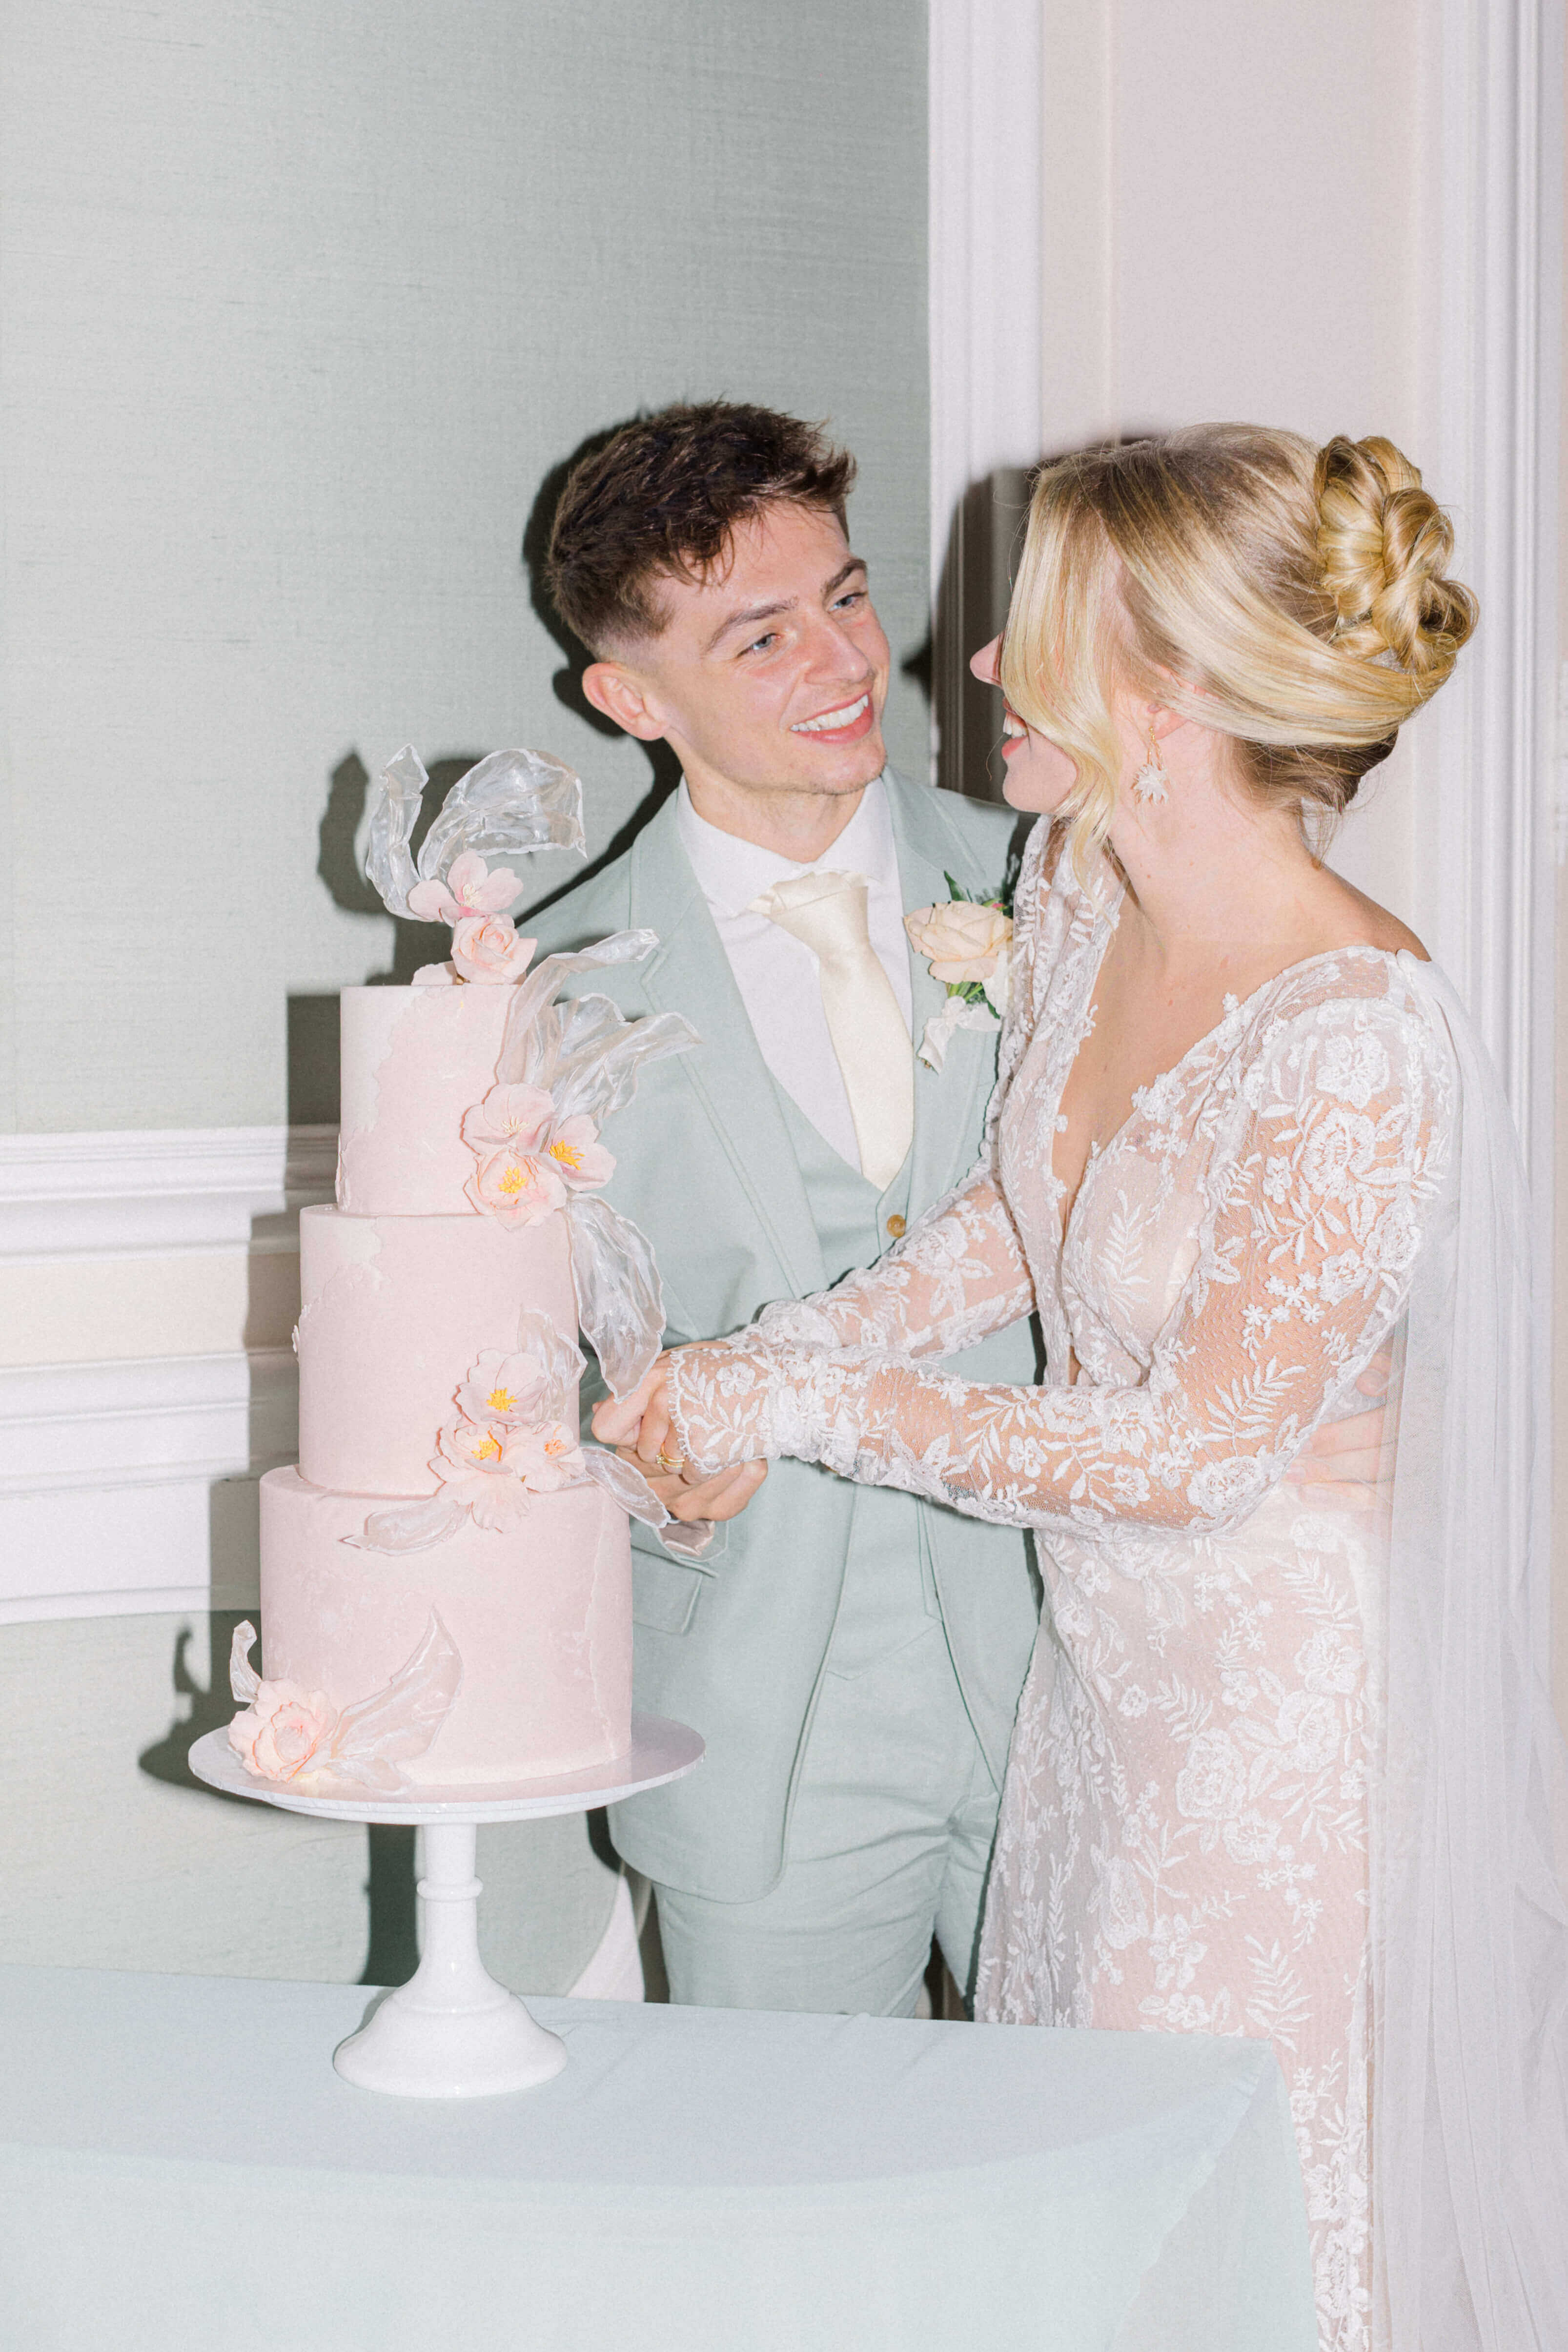 groom and bride cutting pastel peach cake looking at each other. the groom is wearing a mint tux and cream tie on a white shirt. The bride's hair is tied in a high bun and she's wearing a low cut decoletté lace dress with long sleeves